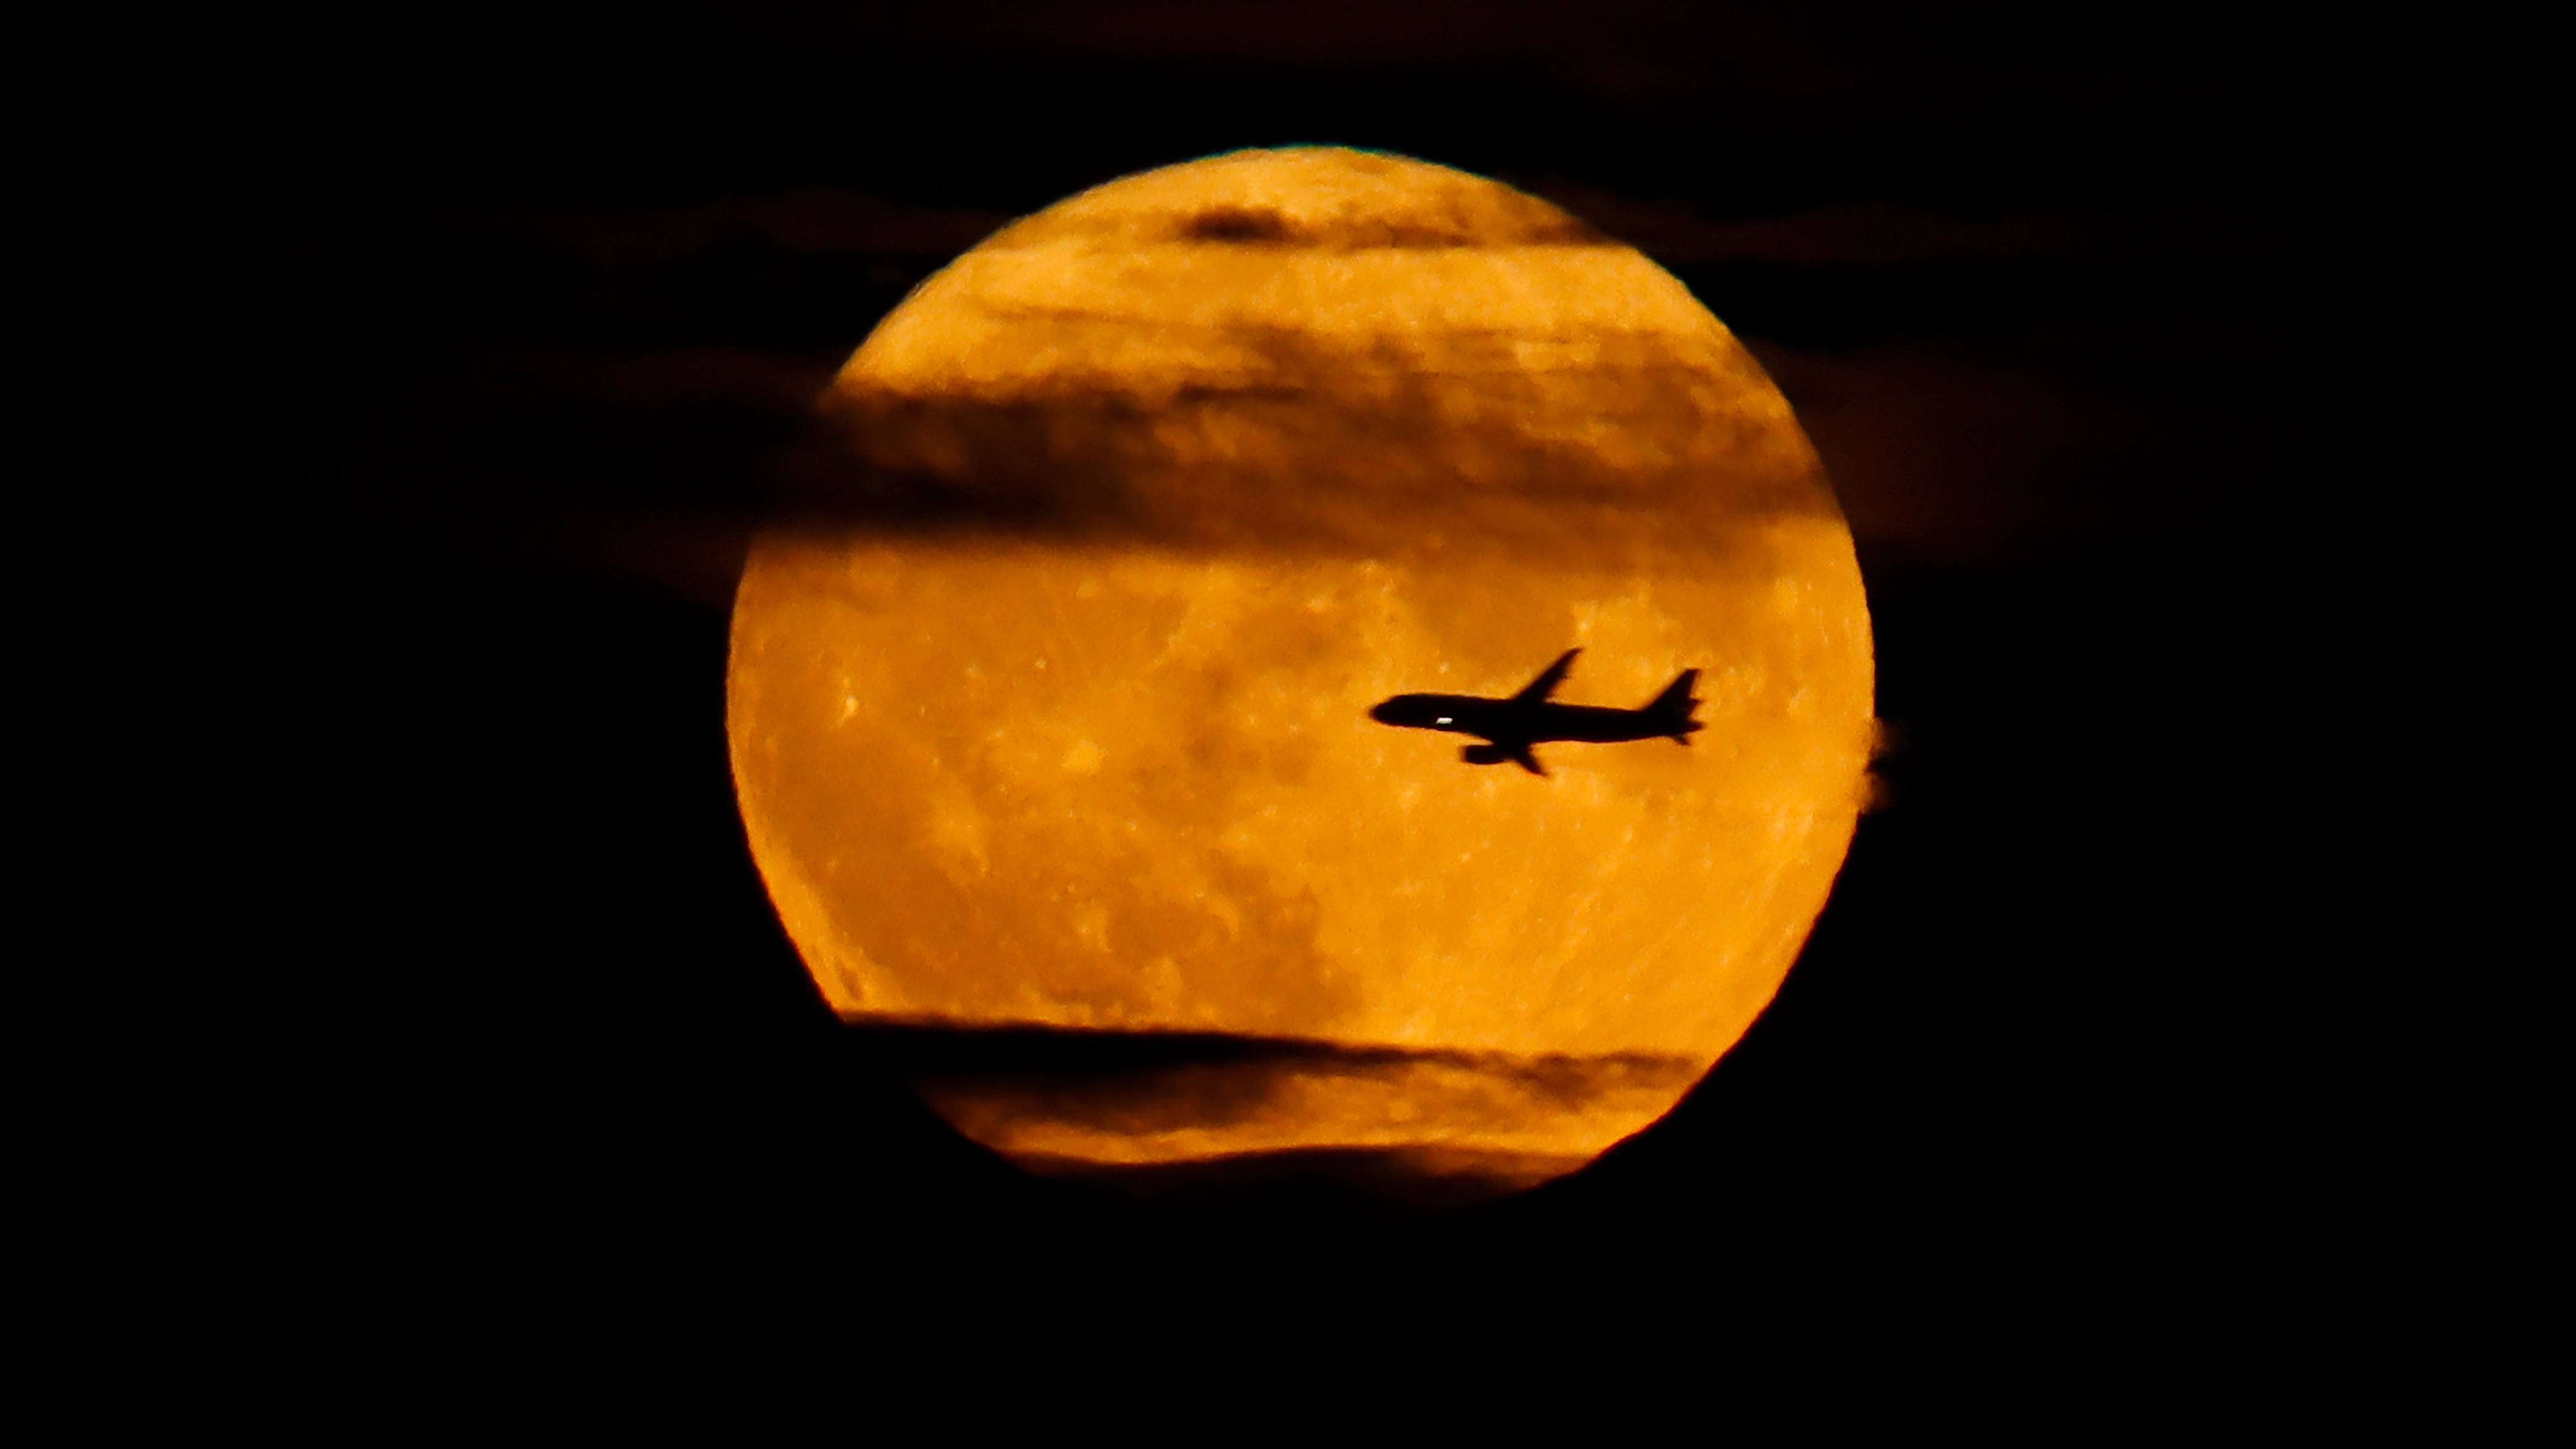 airplane in front of supermoon